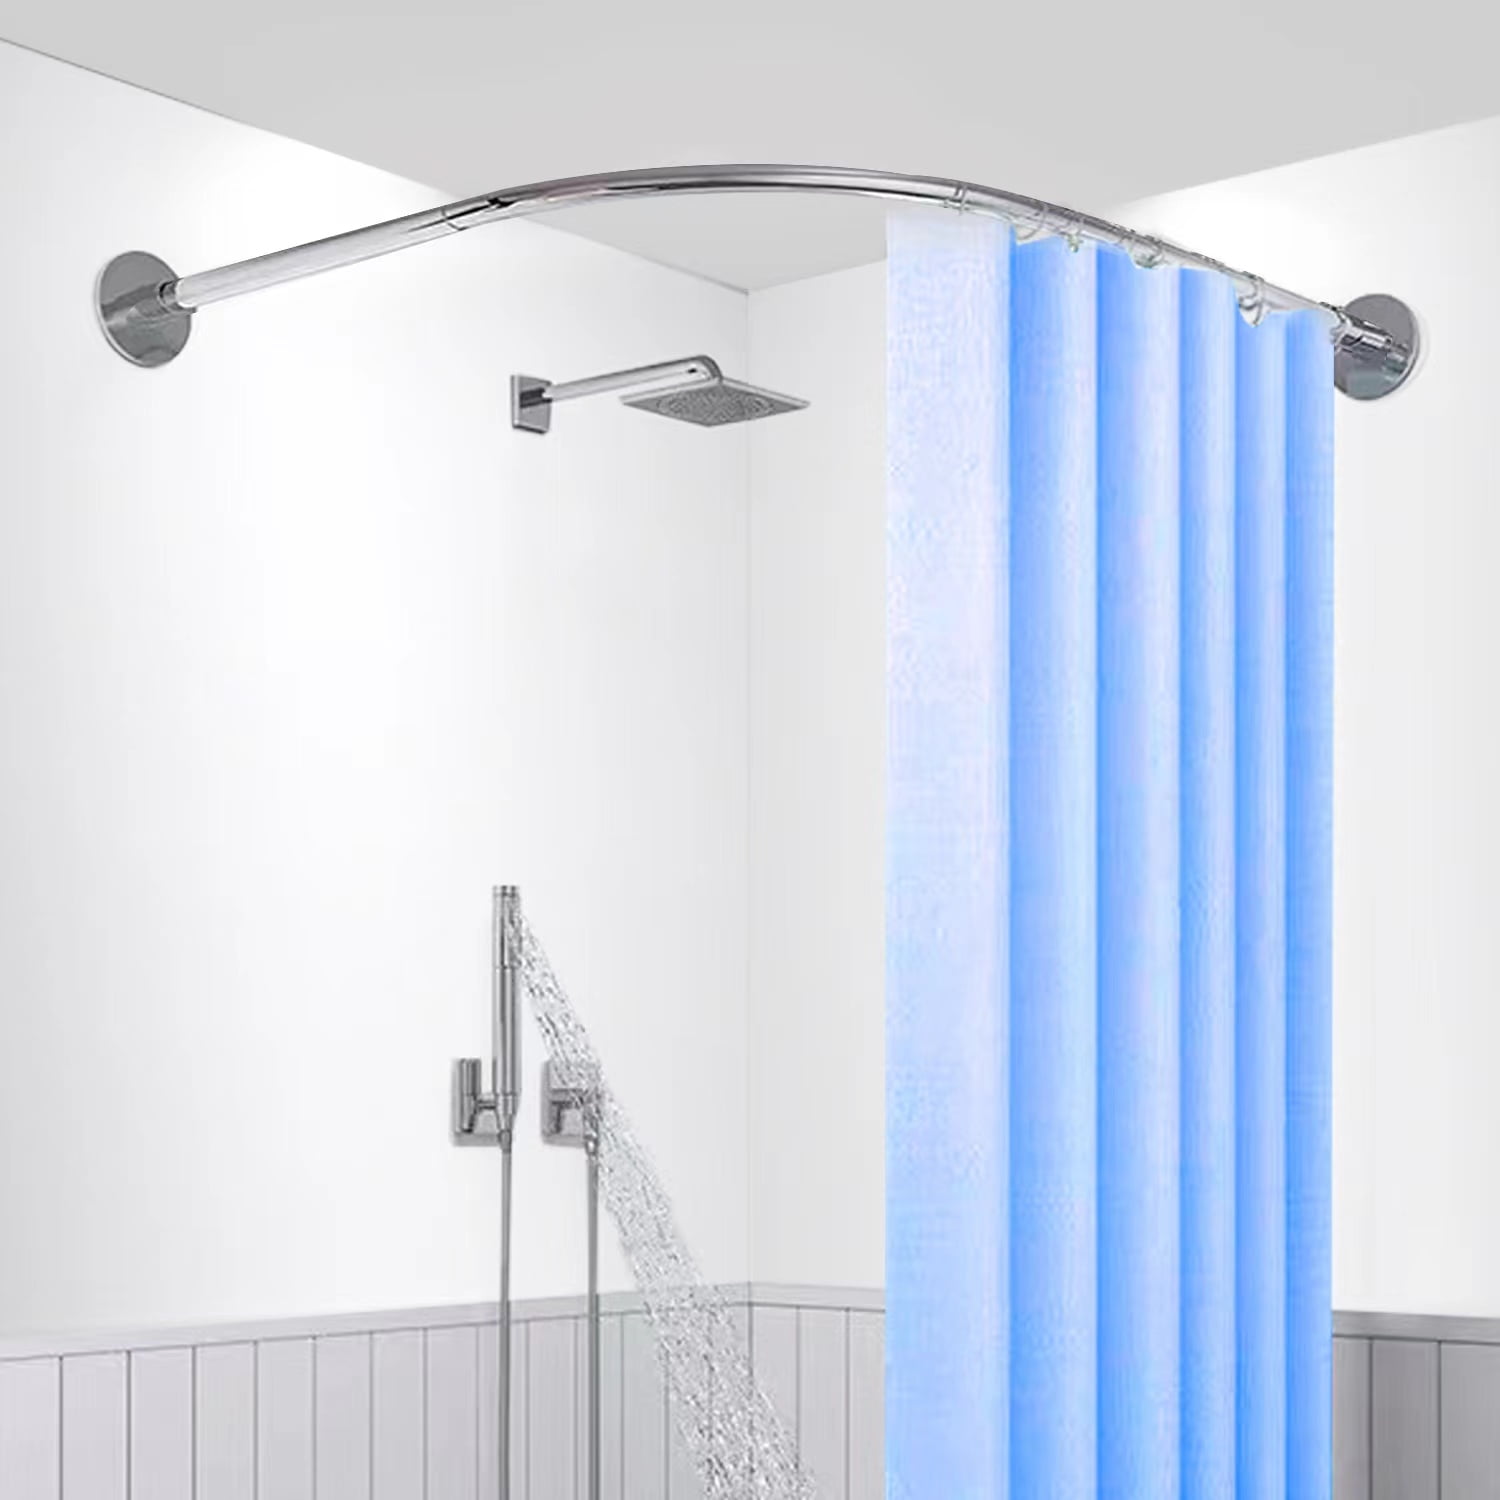 Protalwell Corner Shower Curtain Rod L Shaped Material Stainless Steel Sus304 Size 60 X Silver Color Adhesive No Drill Com